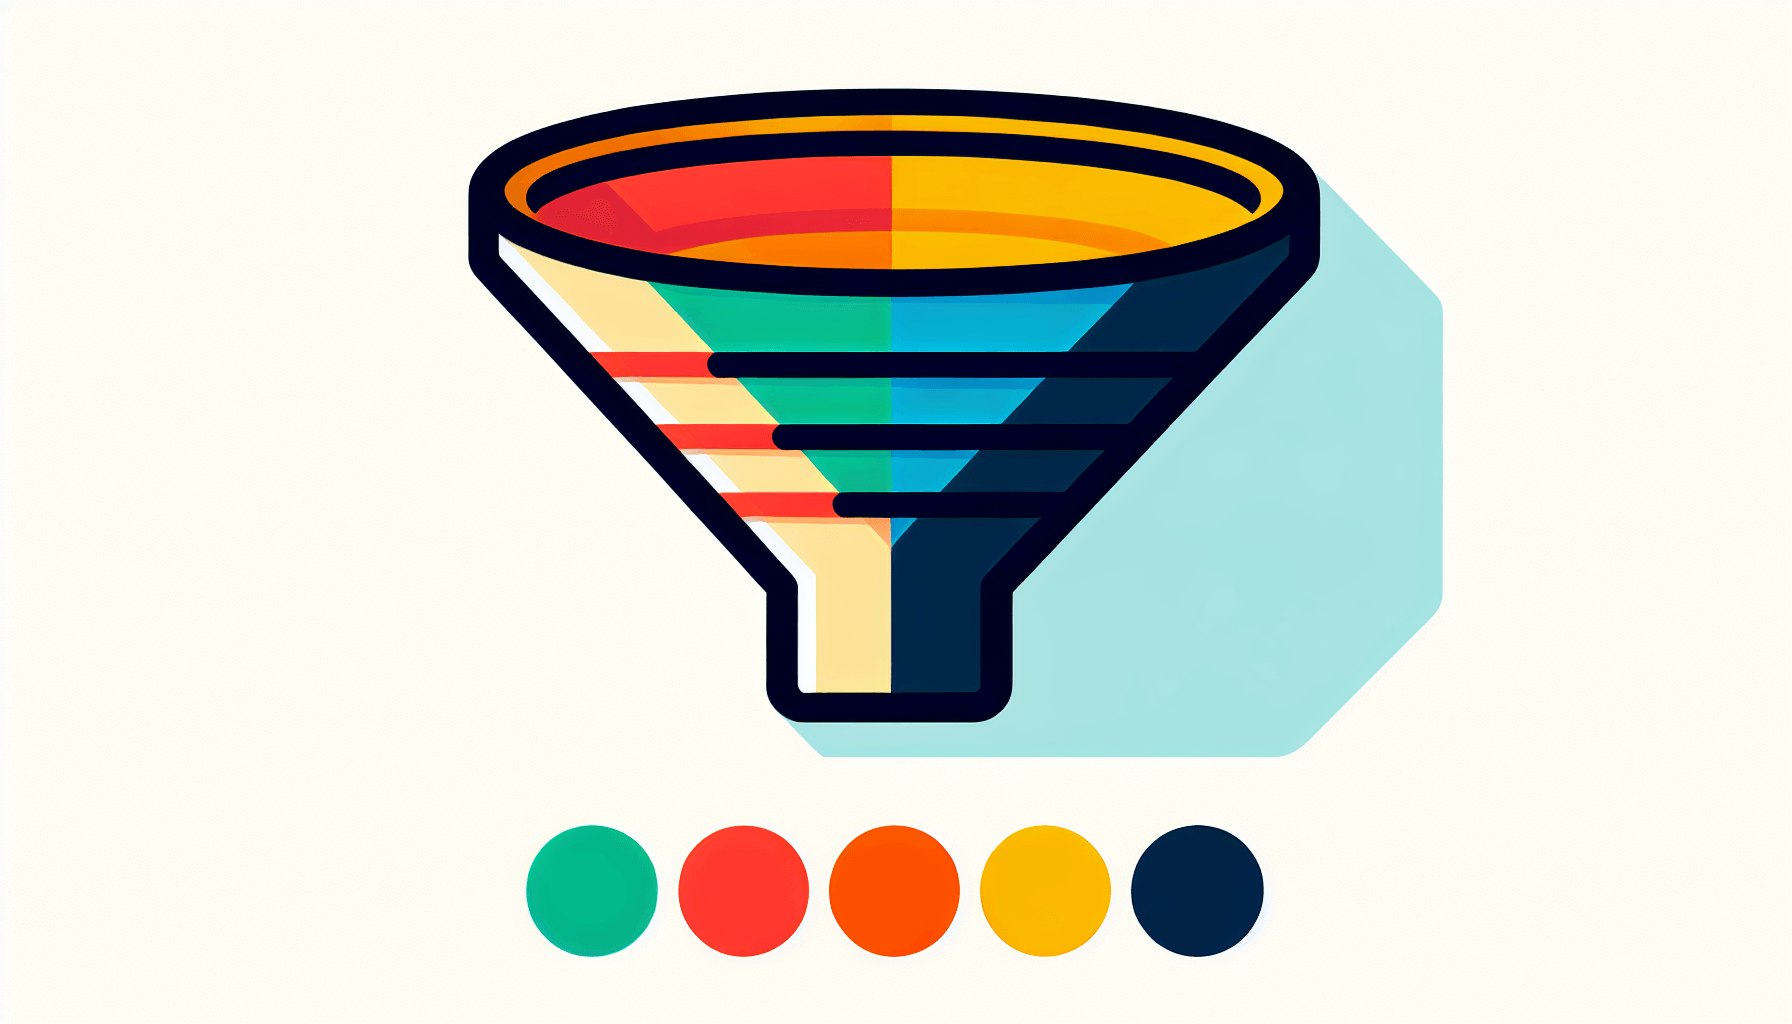 Funnel in flat illustration style and white background, red #f47574, green #88c7a8, yellow #fcc44b, and blue #645bc8 colors.